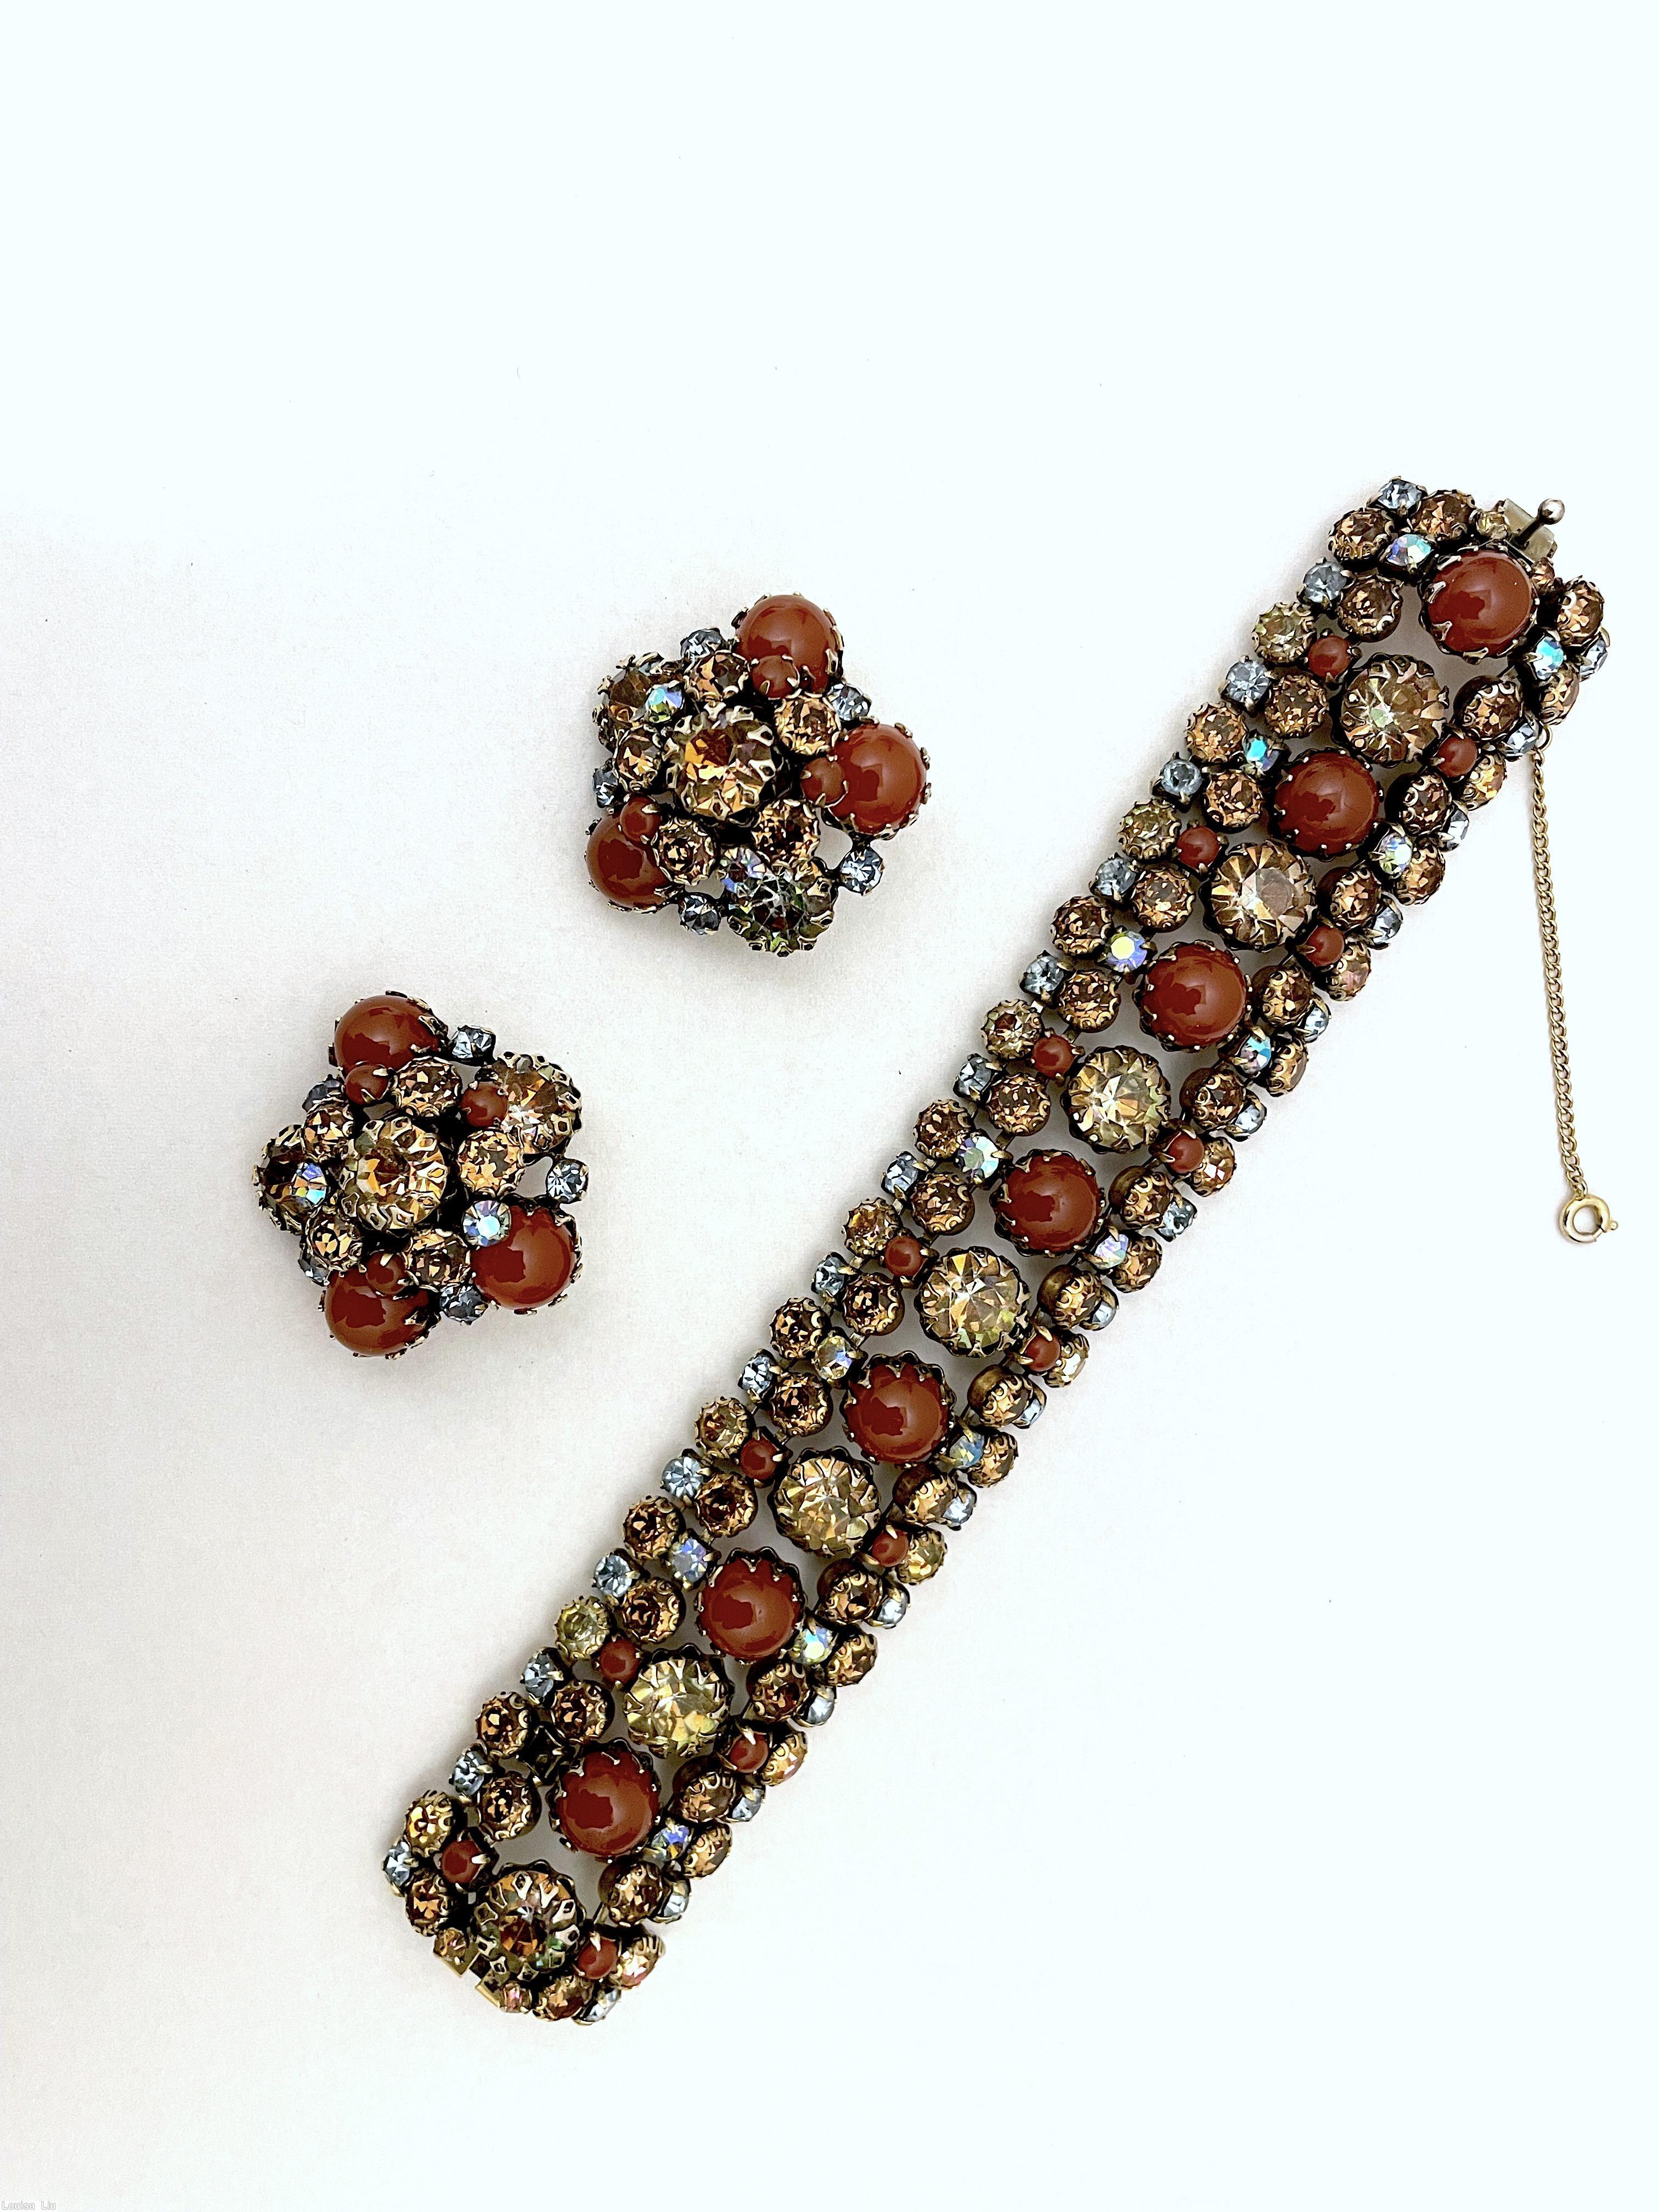 Schreiner 5 rows 14 chaton center row clear champagne carnelian crystal small chaton goldtone jewelry